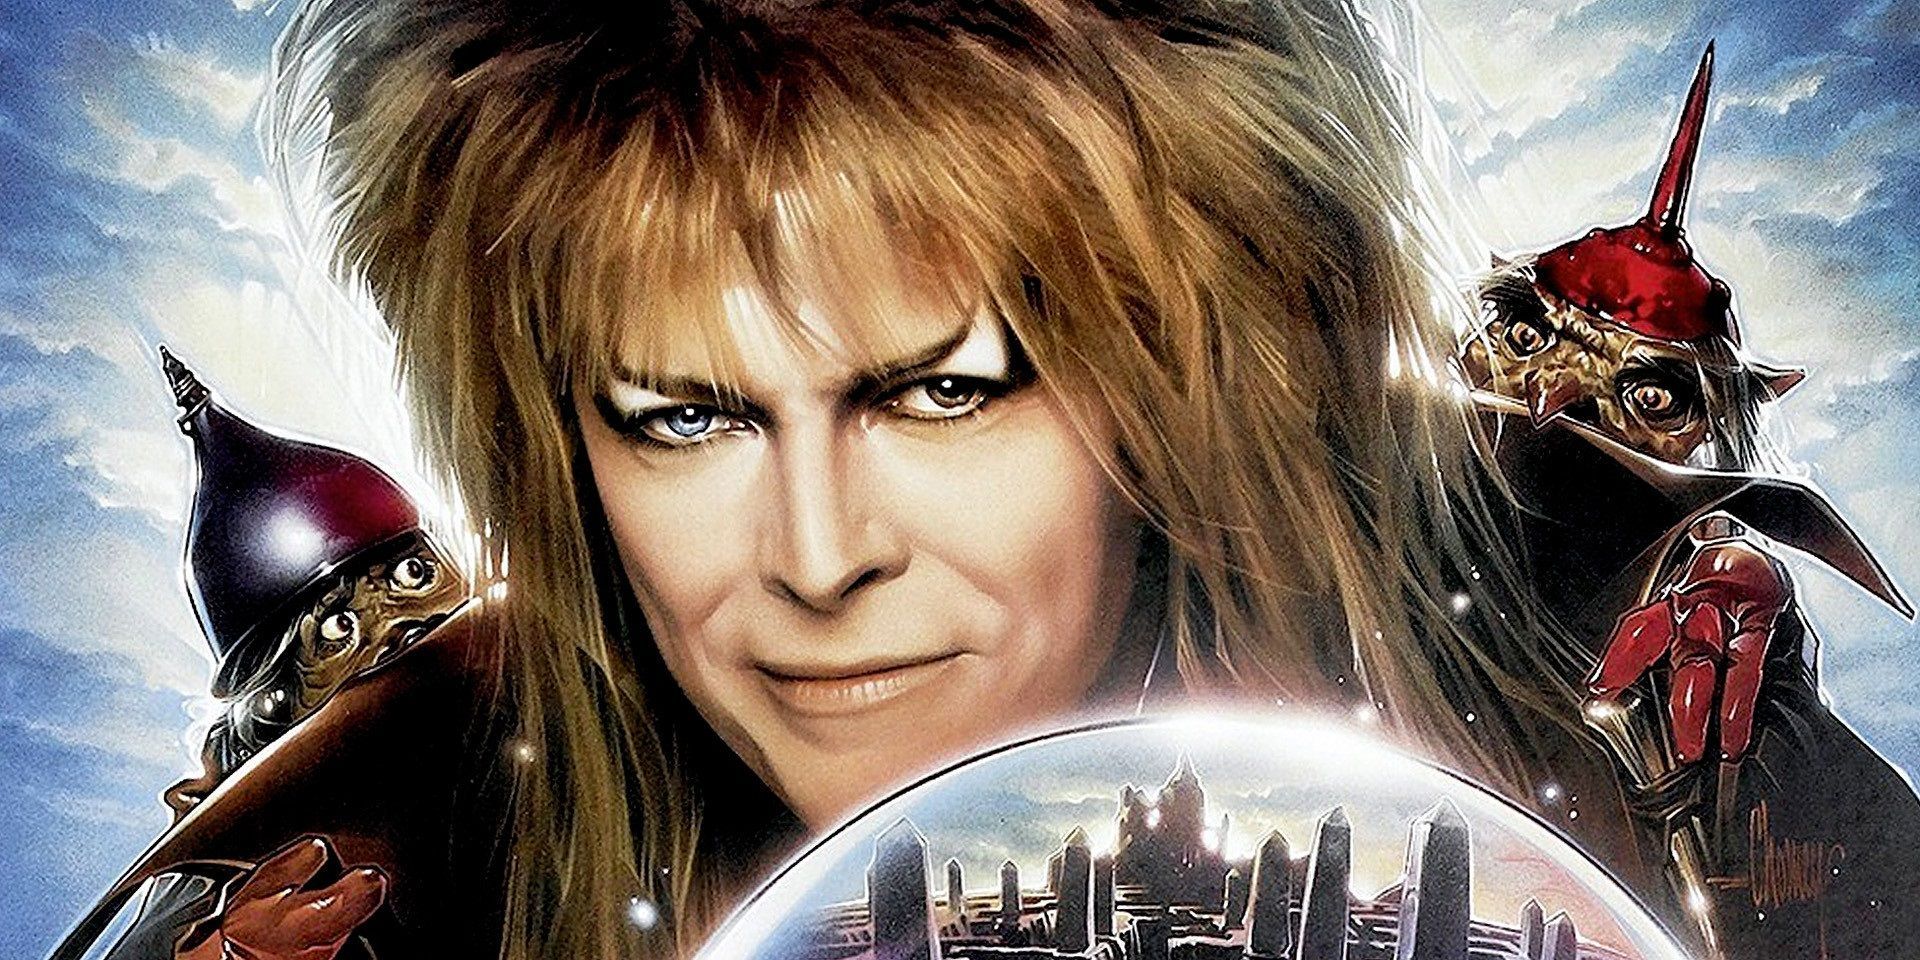 David Bowie as Jedd on the poster for Labyrinth.